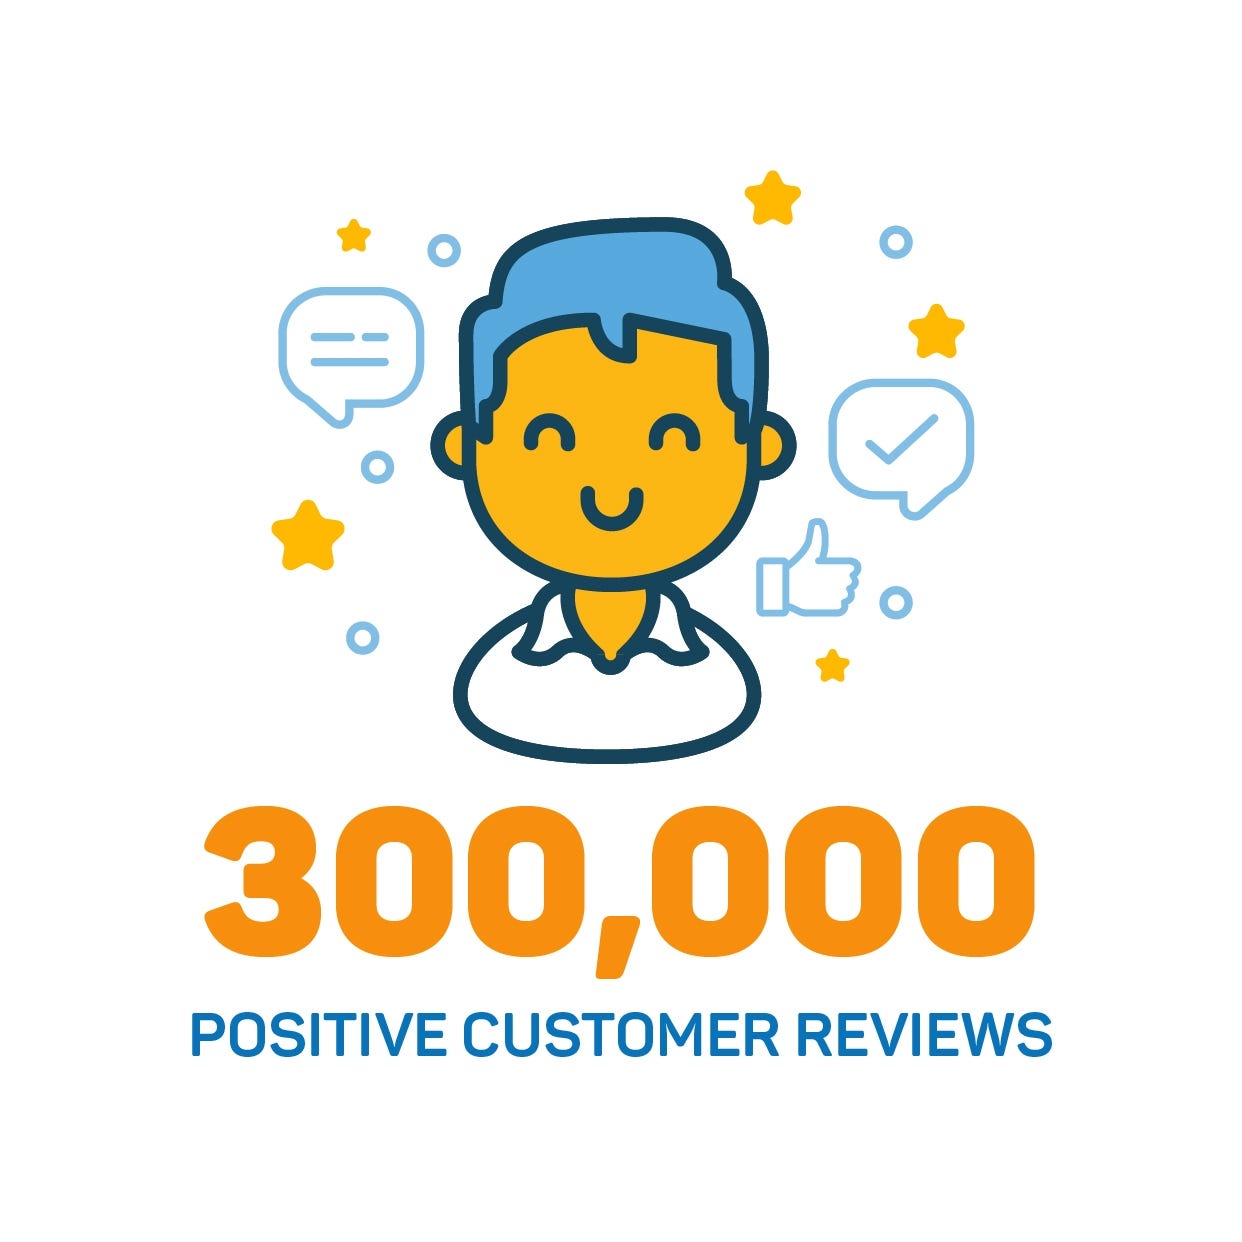 300,000 positive reviews from customers